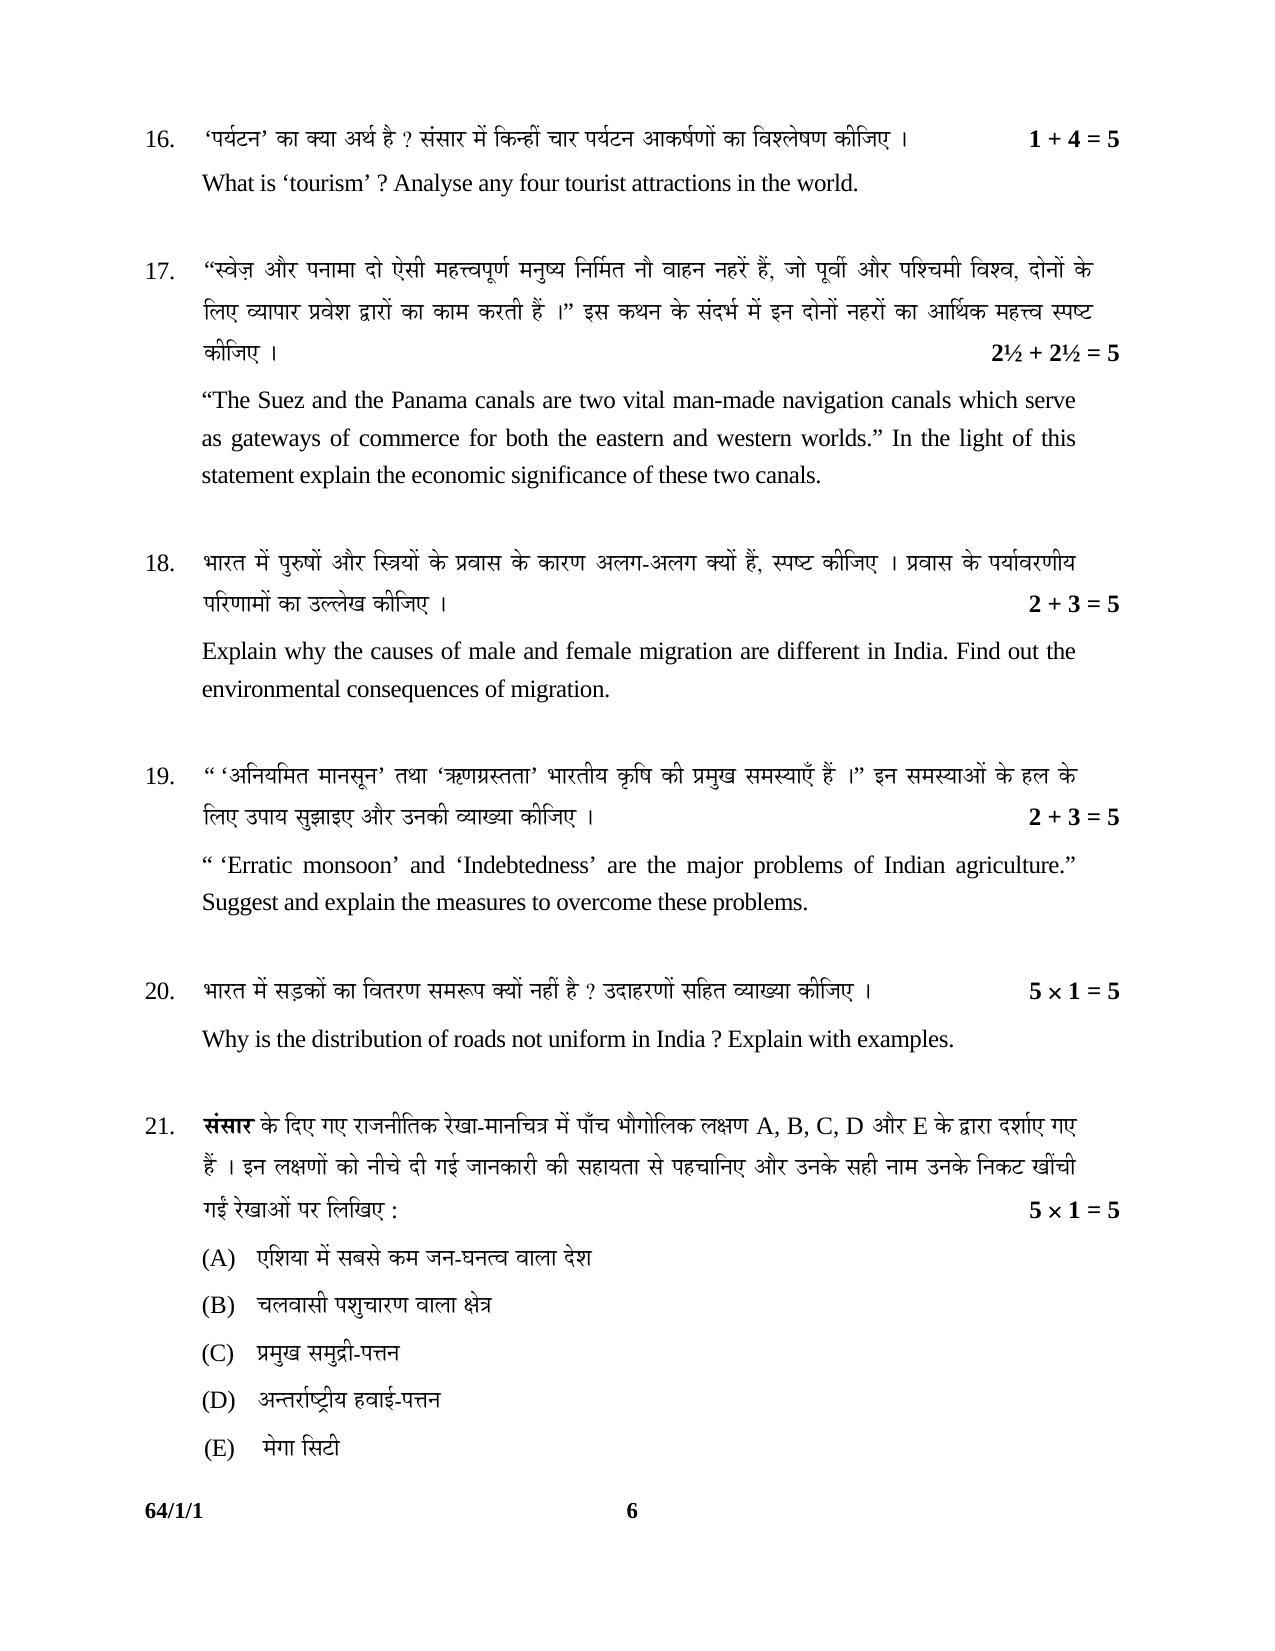 CBSE Class 12 64-1-1 GEOGRAPHY 2016 Question Paper - Page 6